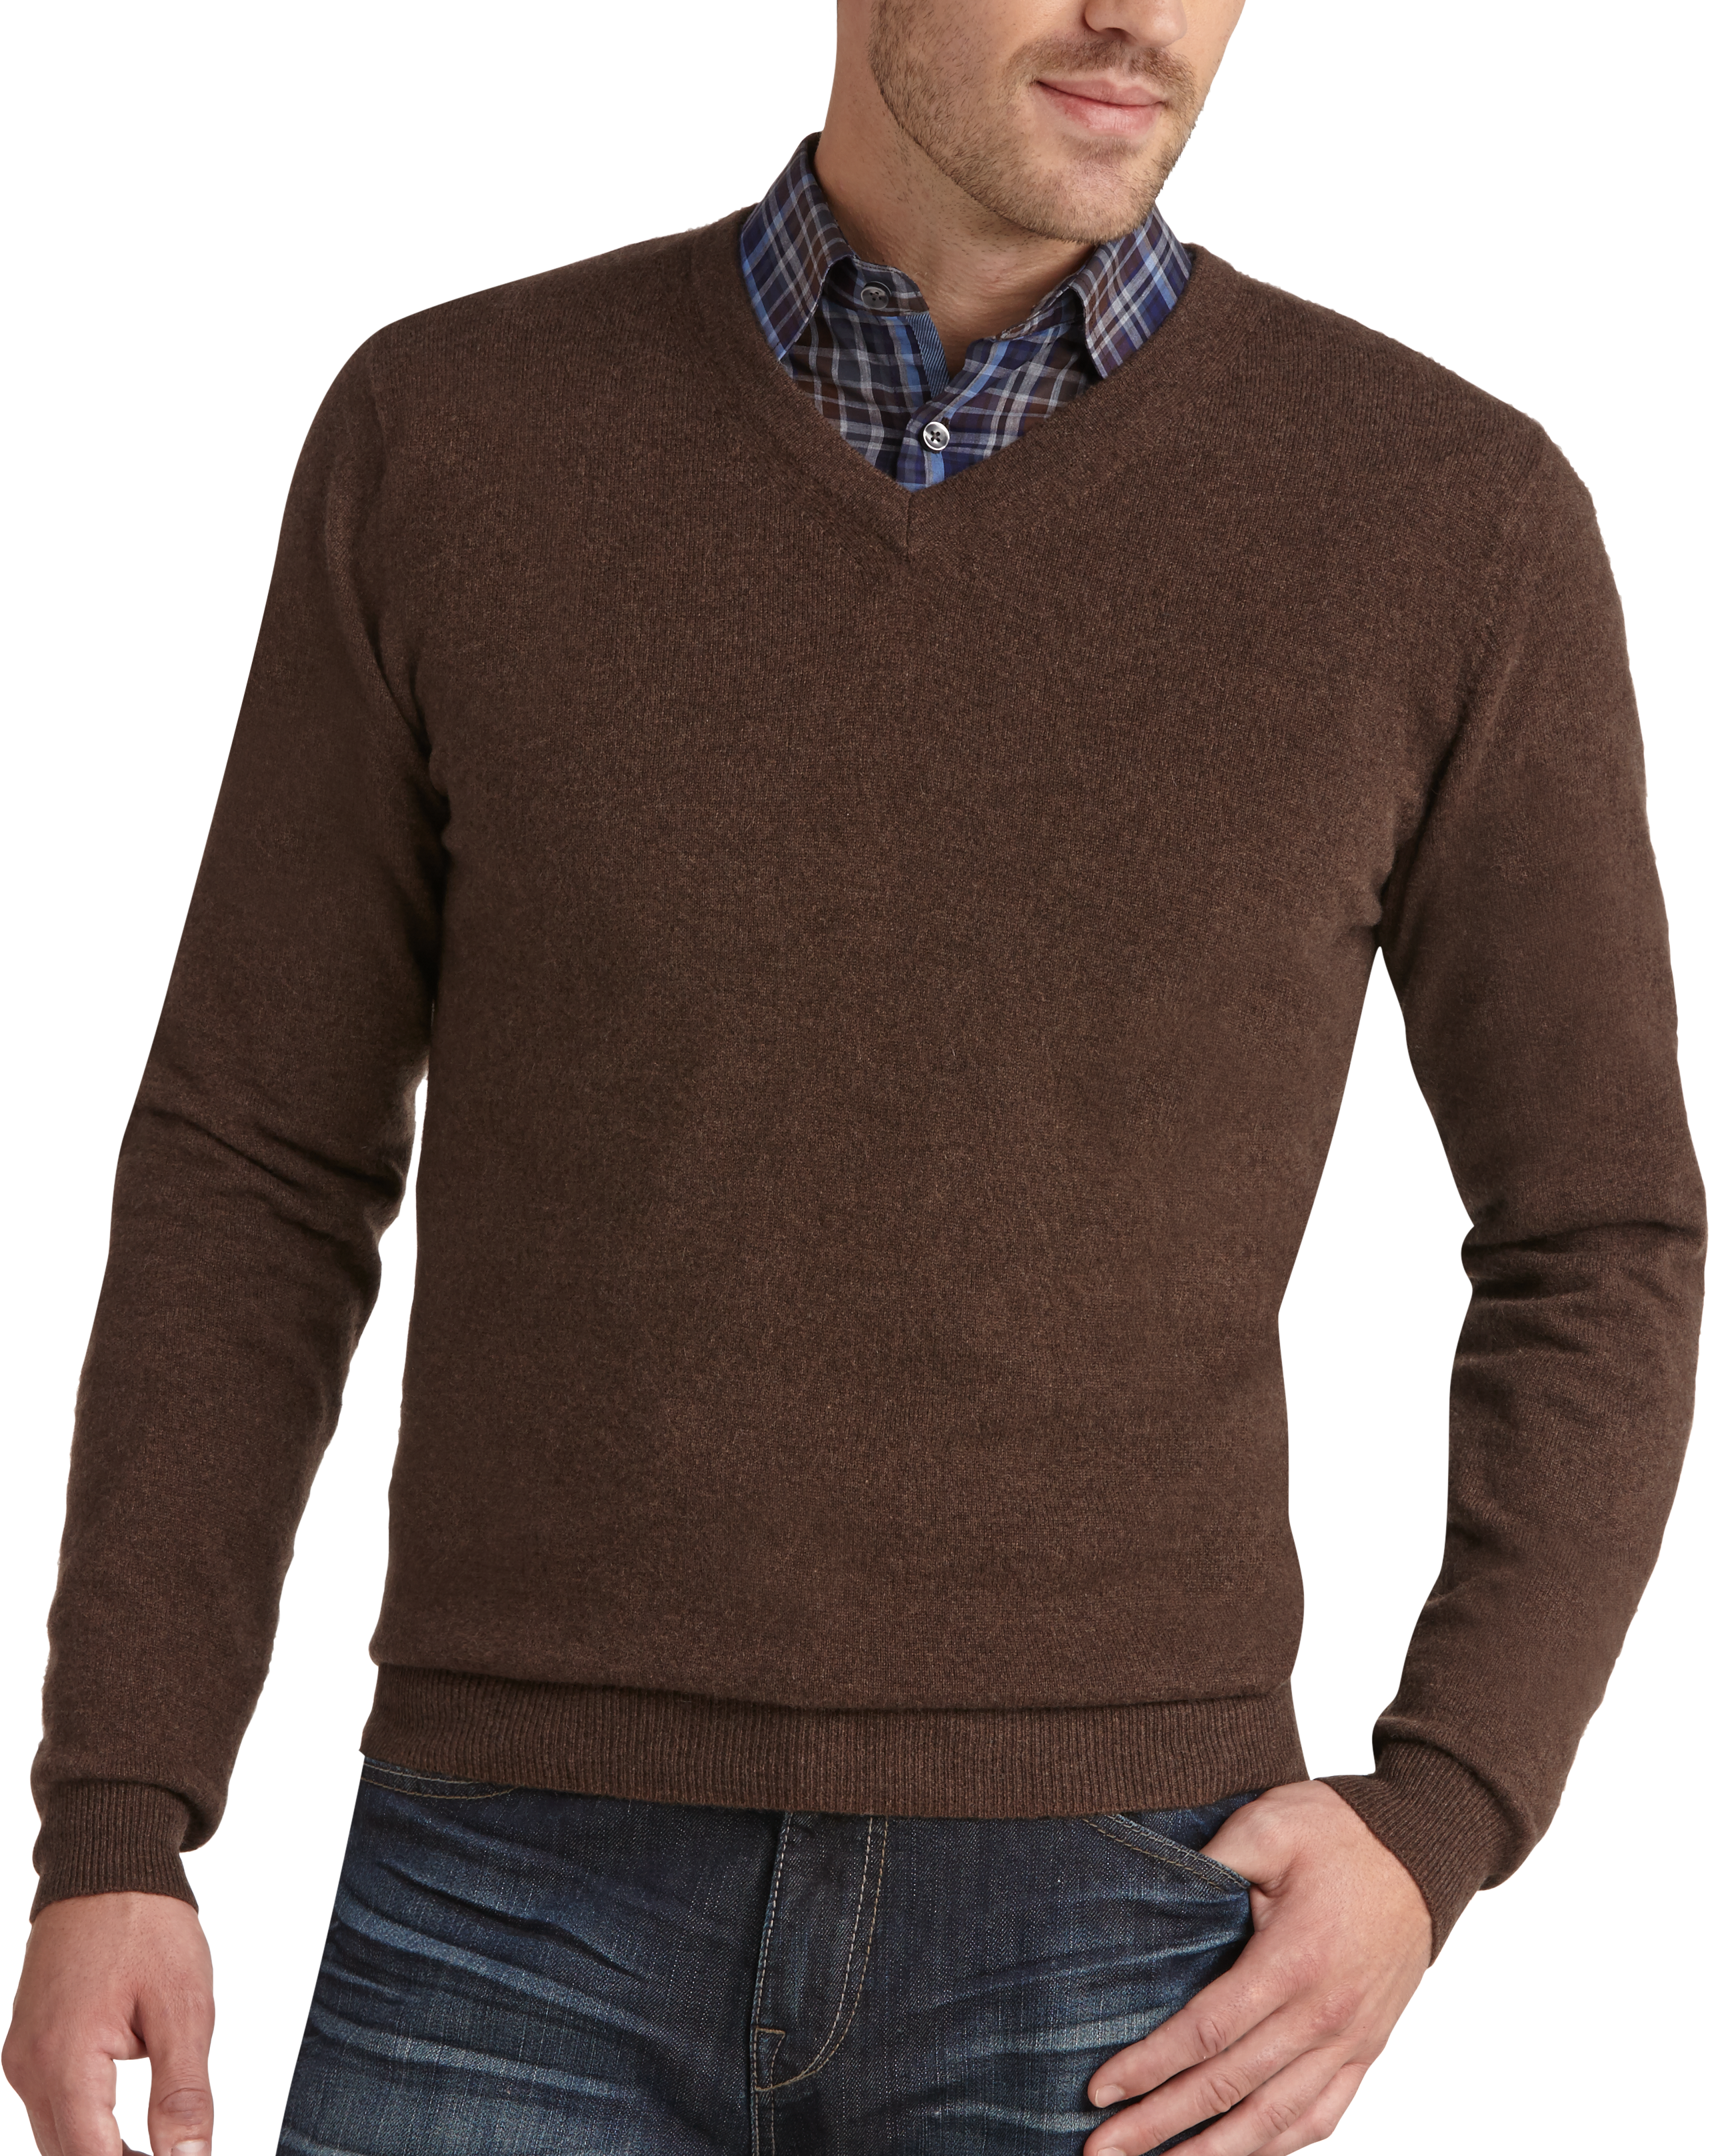 Joseph Abboud Brown V-Neck Cashmere Sweater - Men's Sweaters and Vests ...